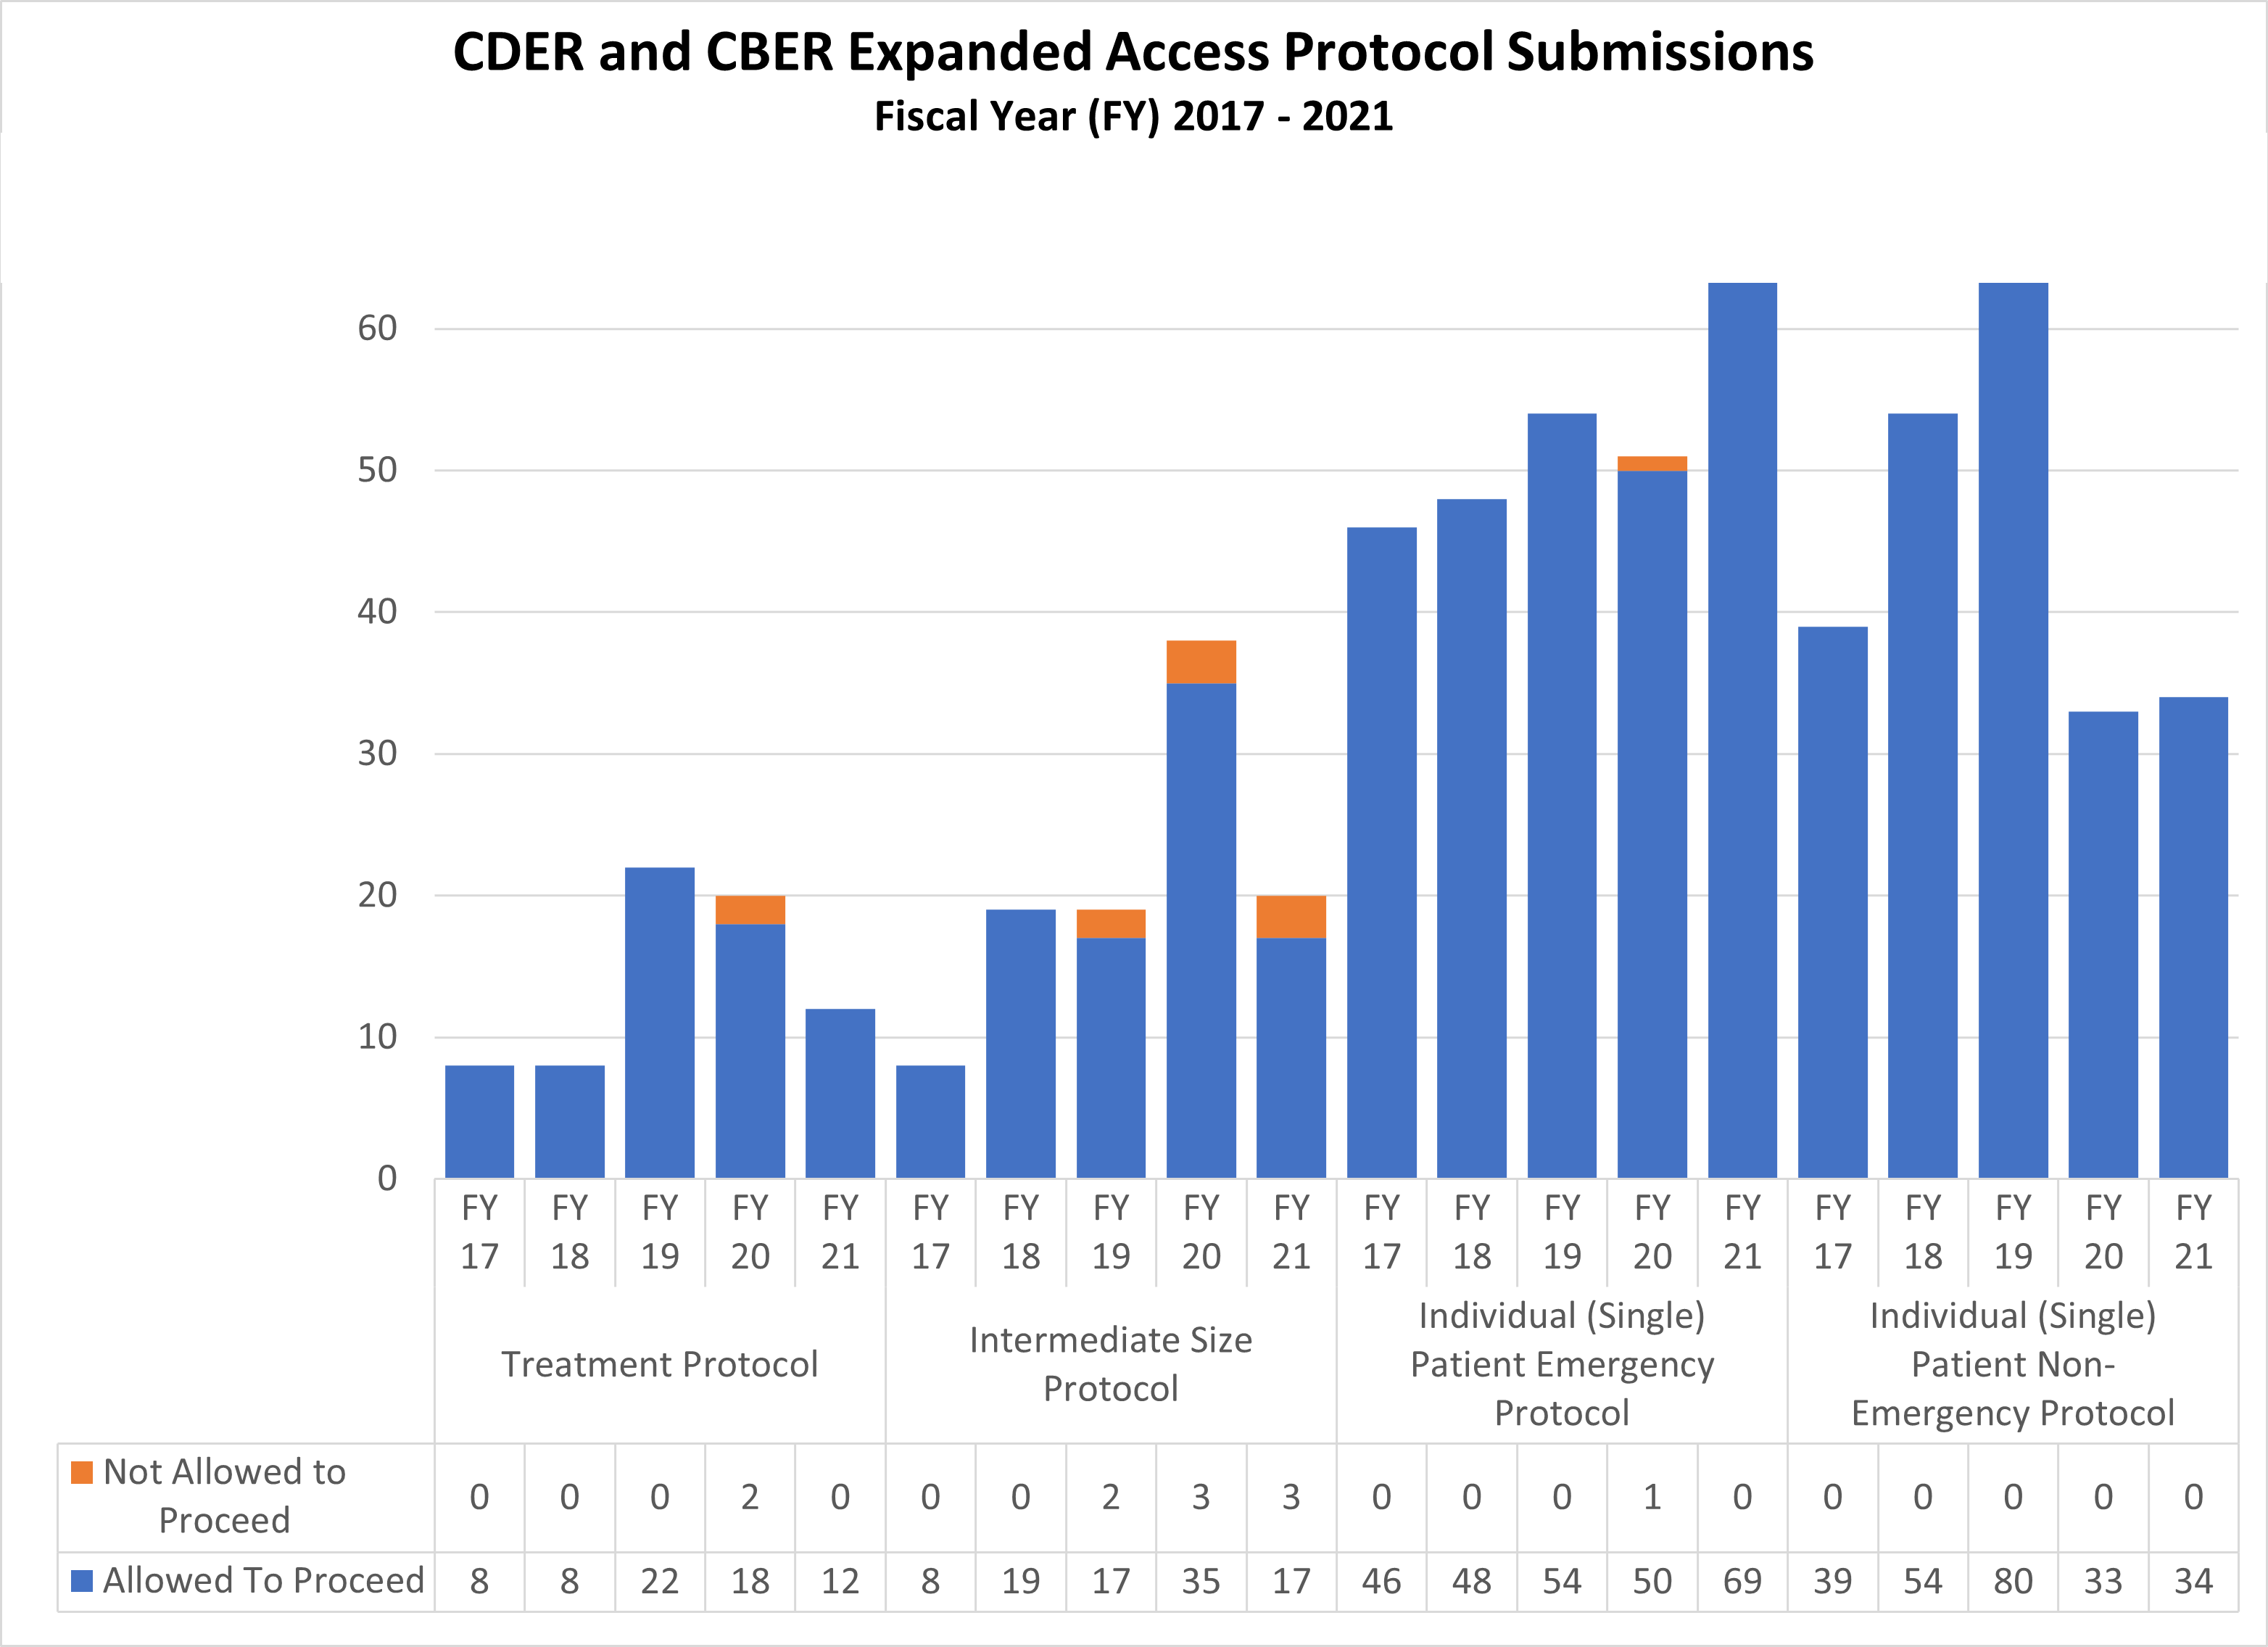 Combined CDER and CBER Expanded Access Protocol Submissions (2017-2021)